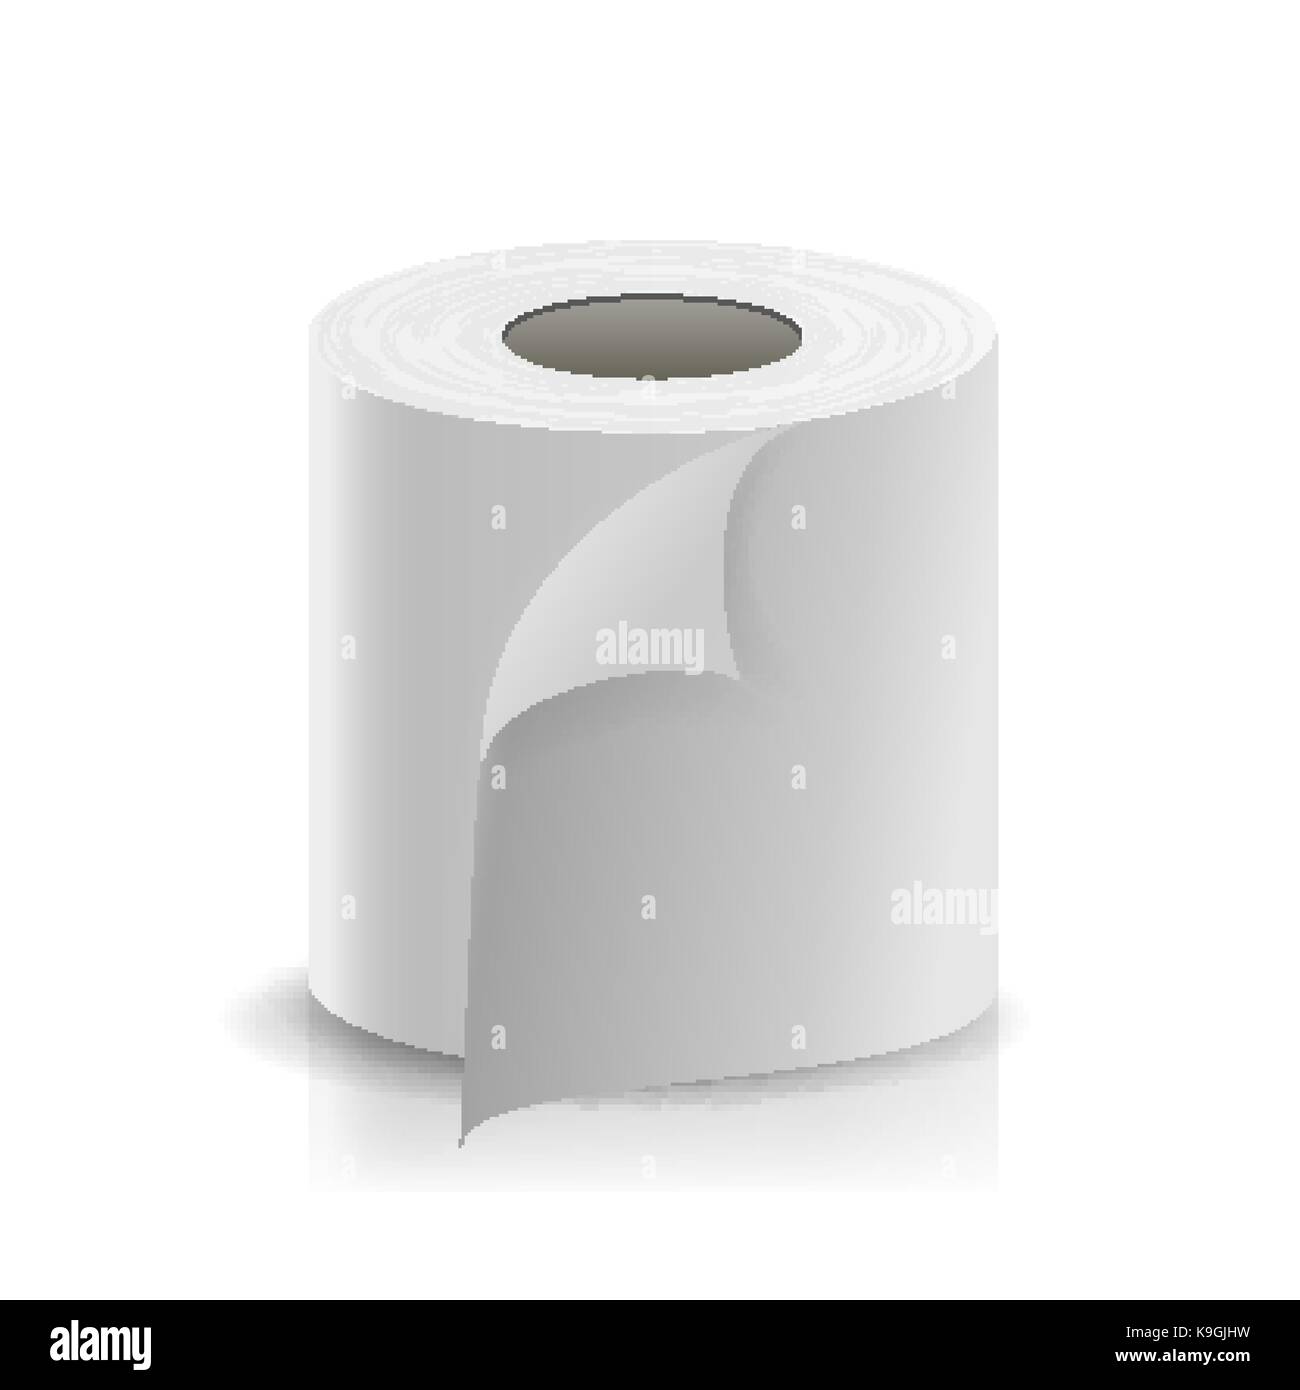 Blank White Paper Rolls Mockup Isolated On Gray Background Stock